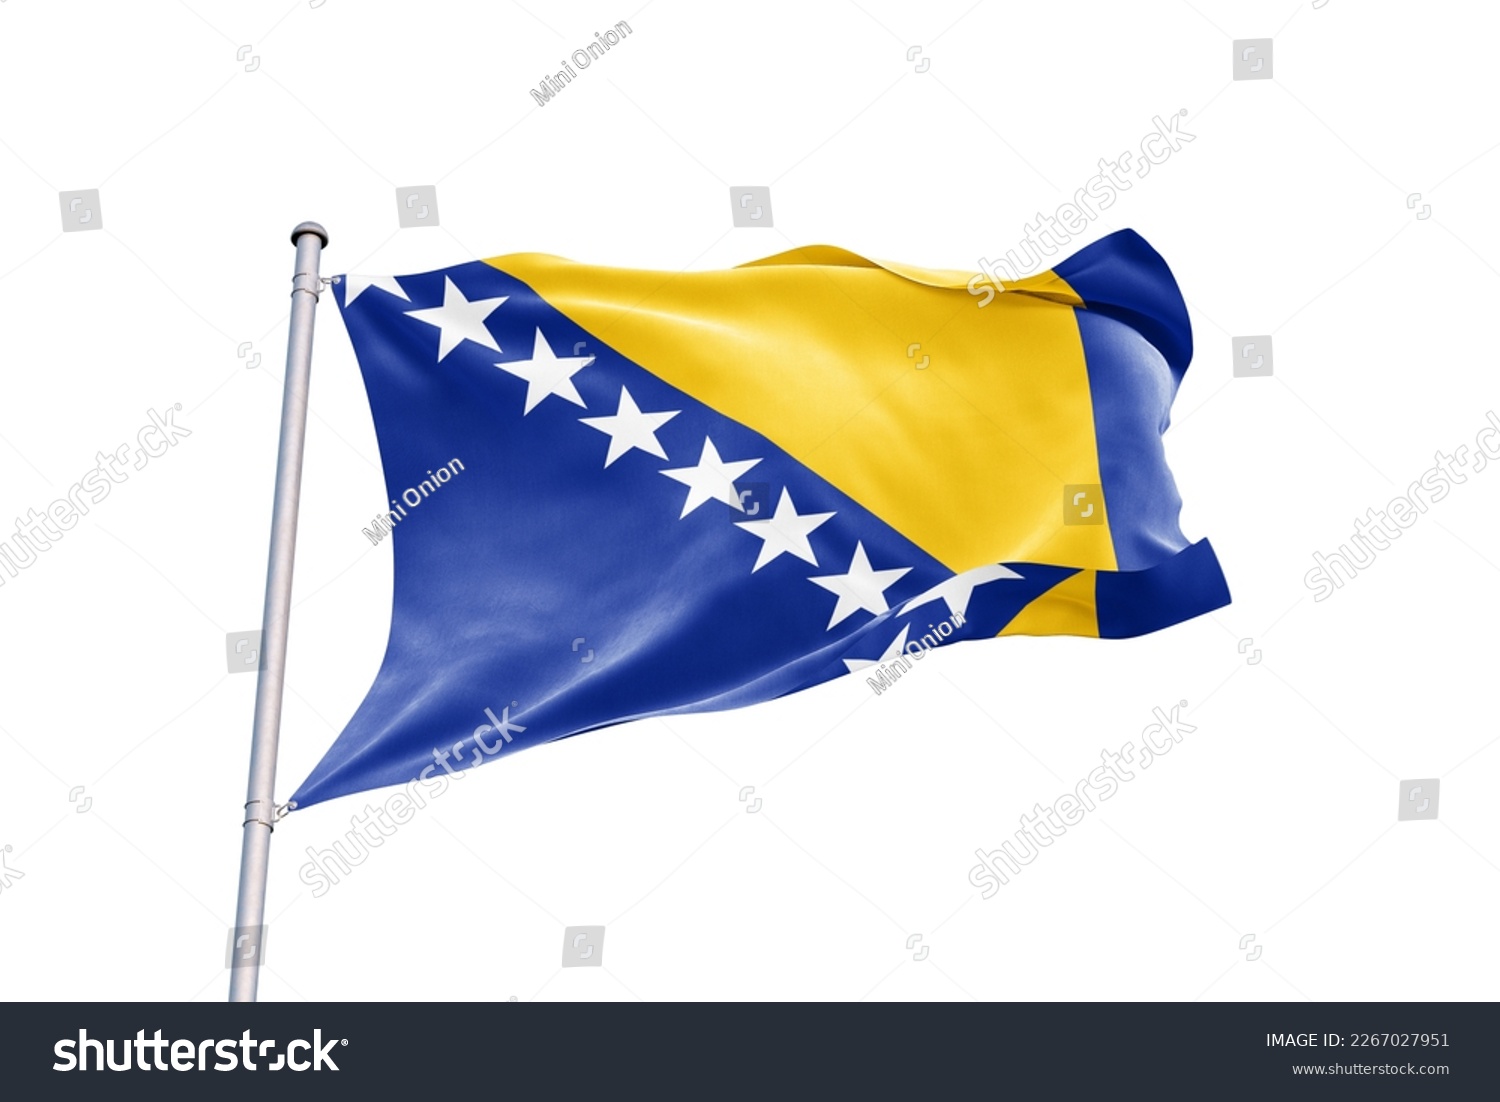 Waving flag of Bosnia and Herzegovina in white background. Bosnia and Herzegovina flag for independence day. The symbol of the state on wavy fabric. #2267027951